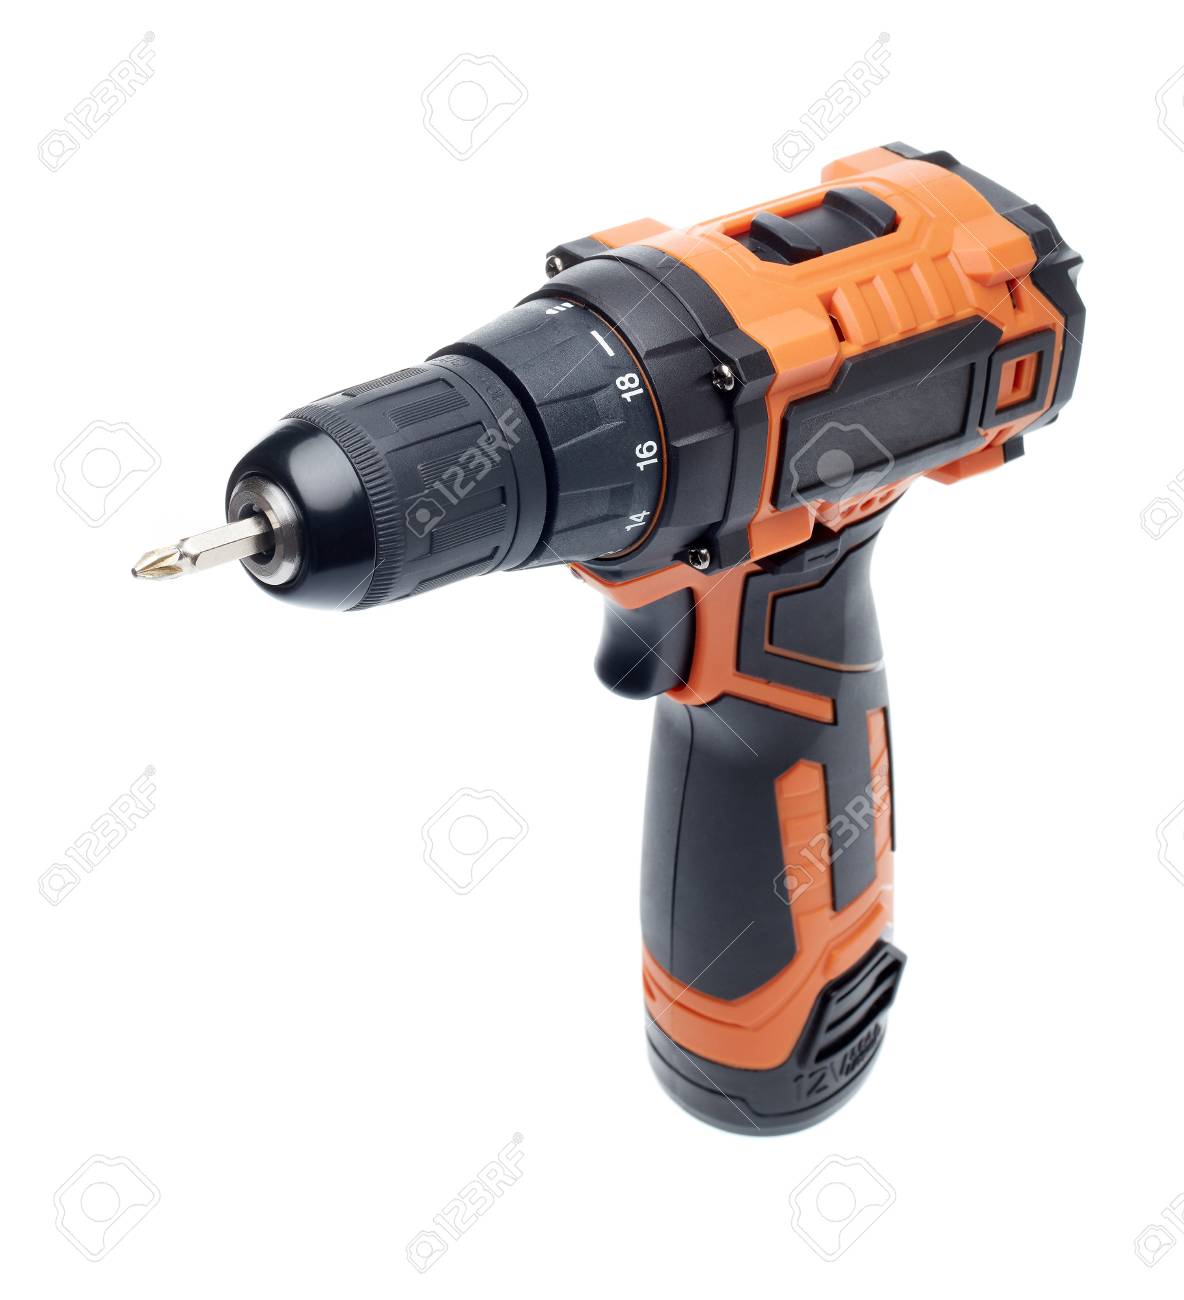 Cordless Drill Screw Gun With Drive Bit Isolated